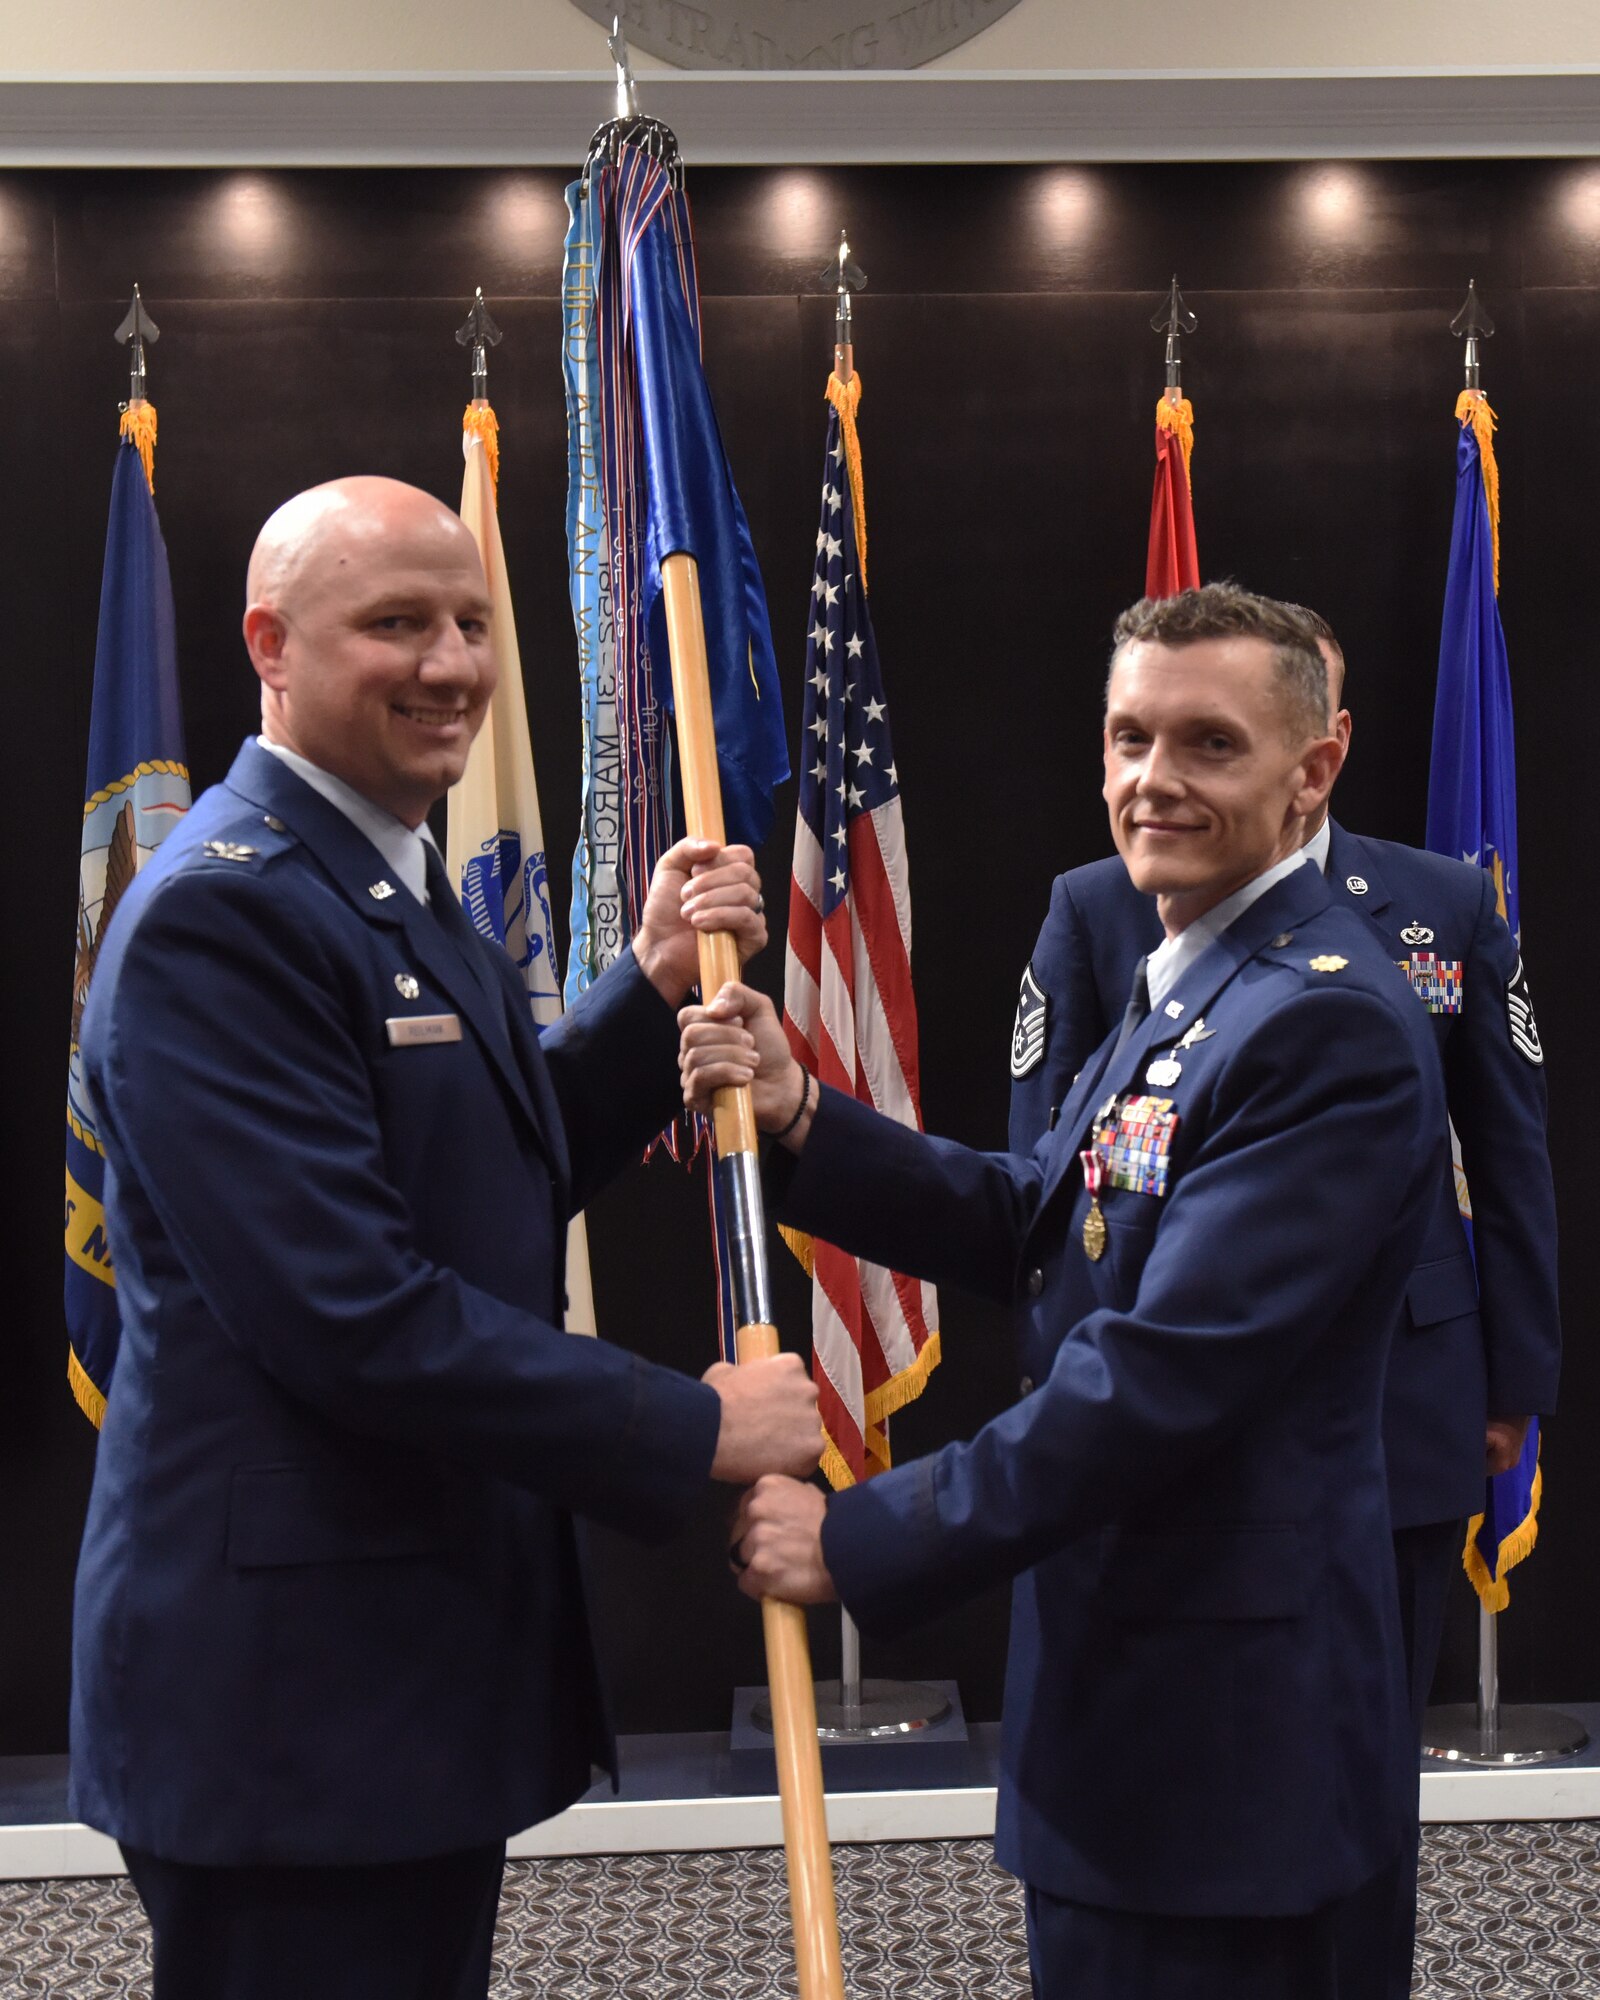 U.S. Air Force Maj. William Bennett (right), 17th Communications Squadron outgoing commander, relinquishes command to Col. Matthew Reilman, 17th Training Wing commander,  during the 17th CS change of command ceremony, at the Powell Event Center, Goodfellow Air Force Base, Texas, May 5, 2022.  Passing the guidon physically represents the symbolism of passing the squadron responsibilities to the next commander. (U.S. Air Force photo by Airman 1st Class Zachary Heimbuch)